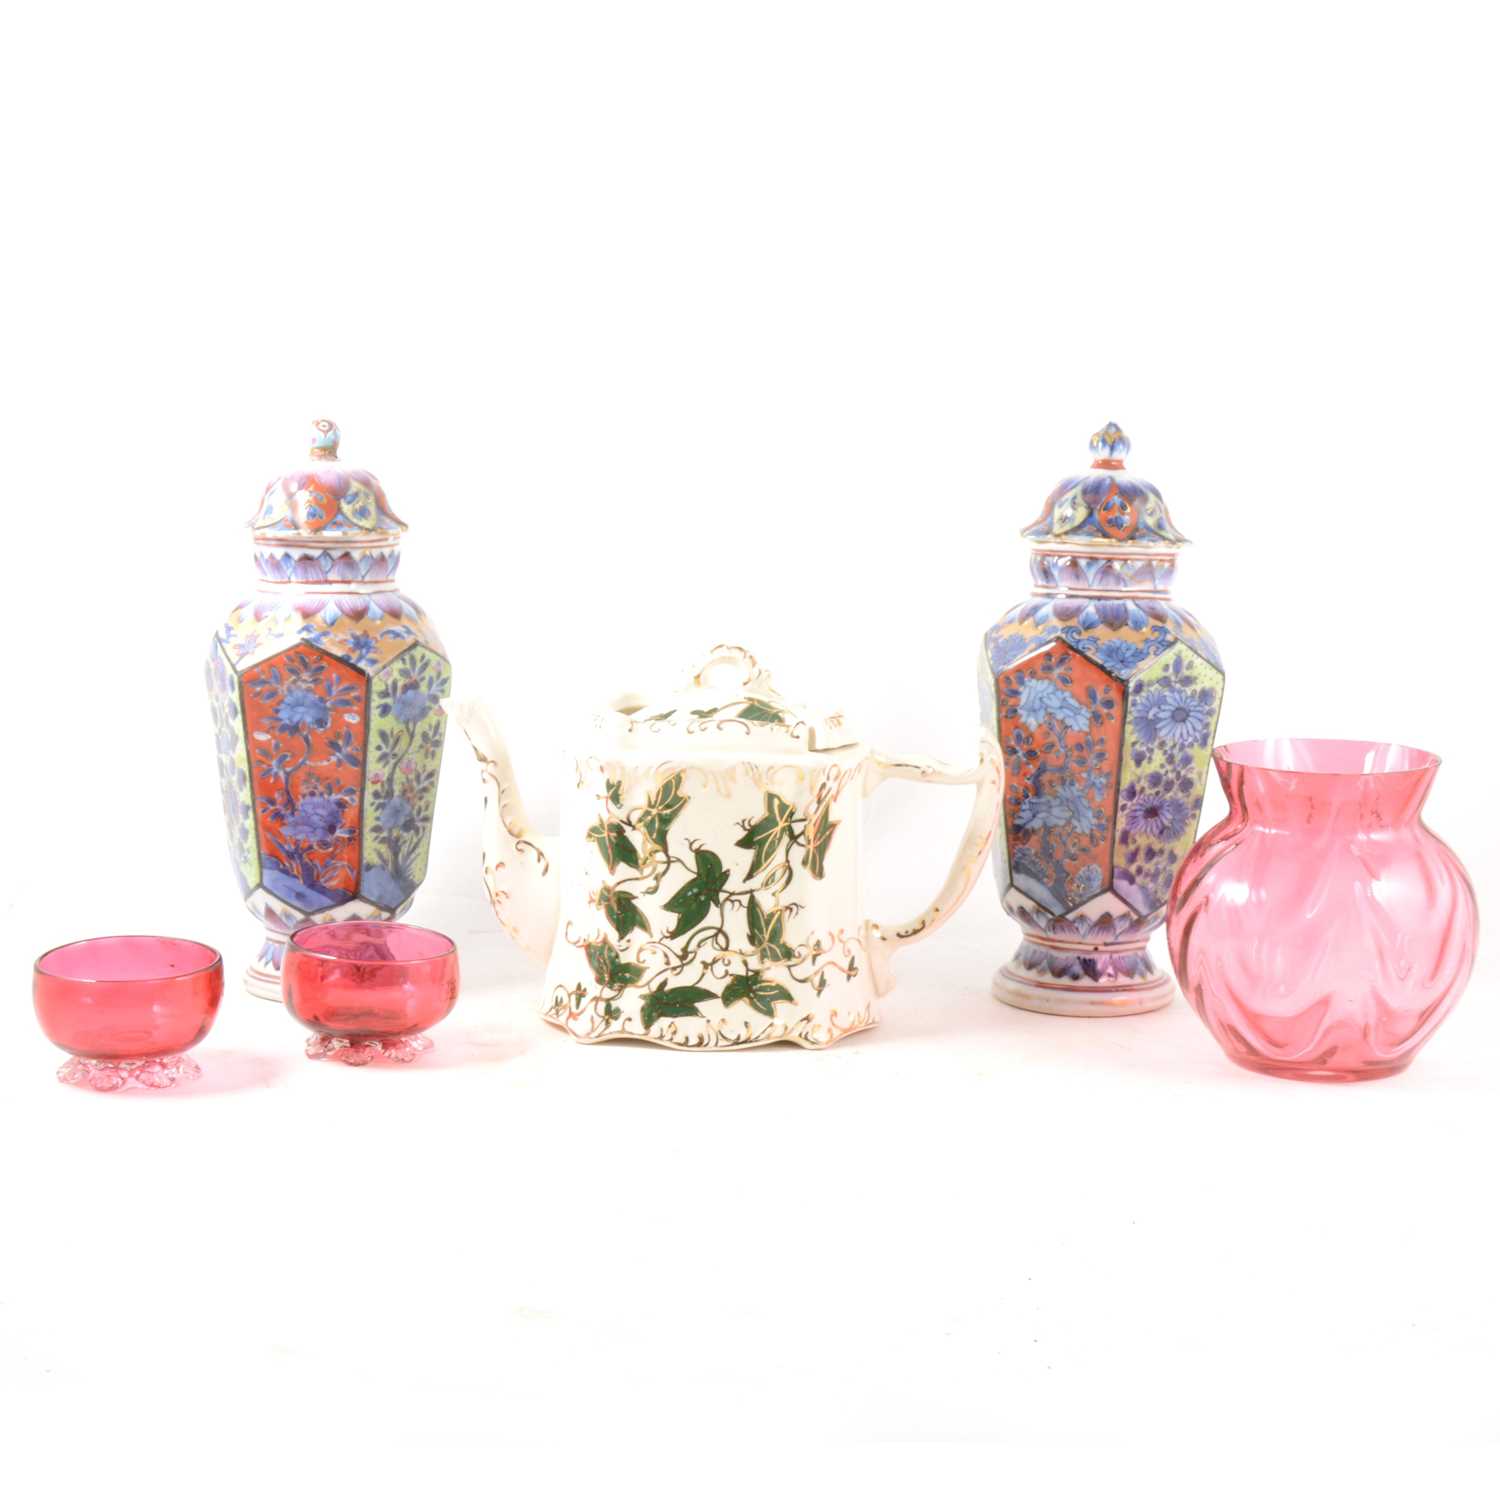 Lot 38 - A collection of decorative ceramics and glassware in two boxes.